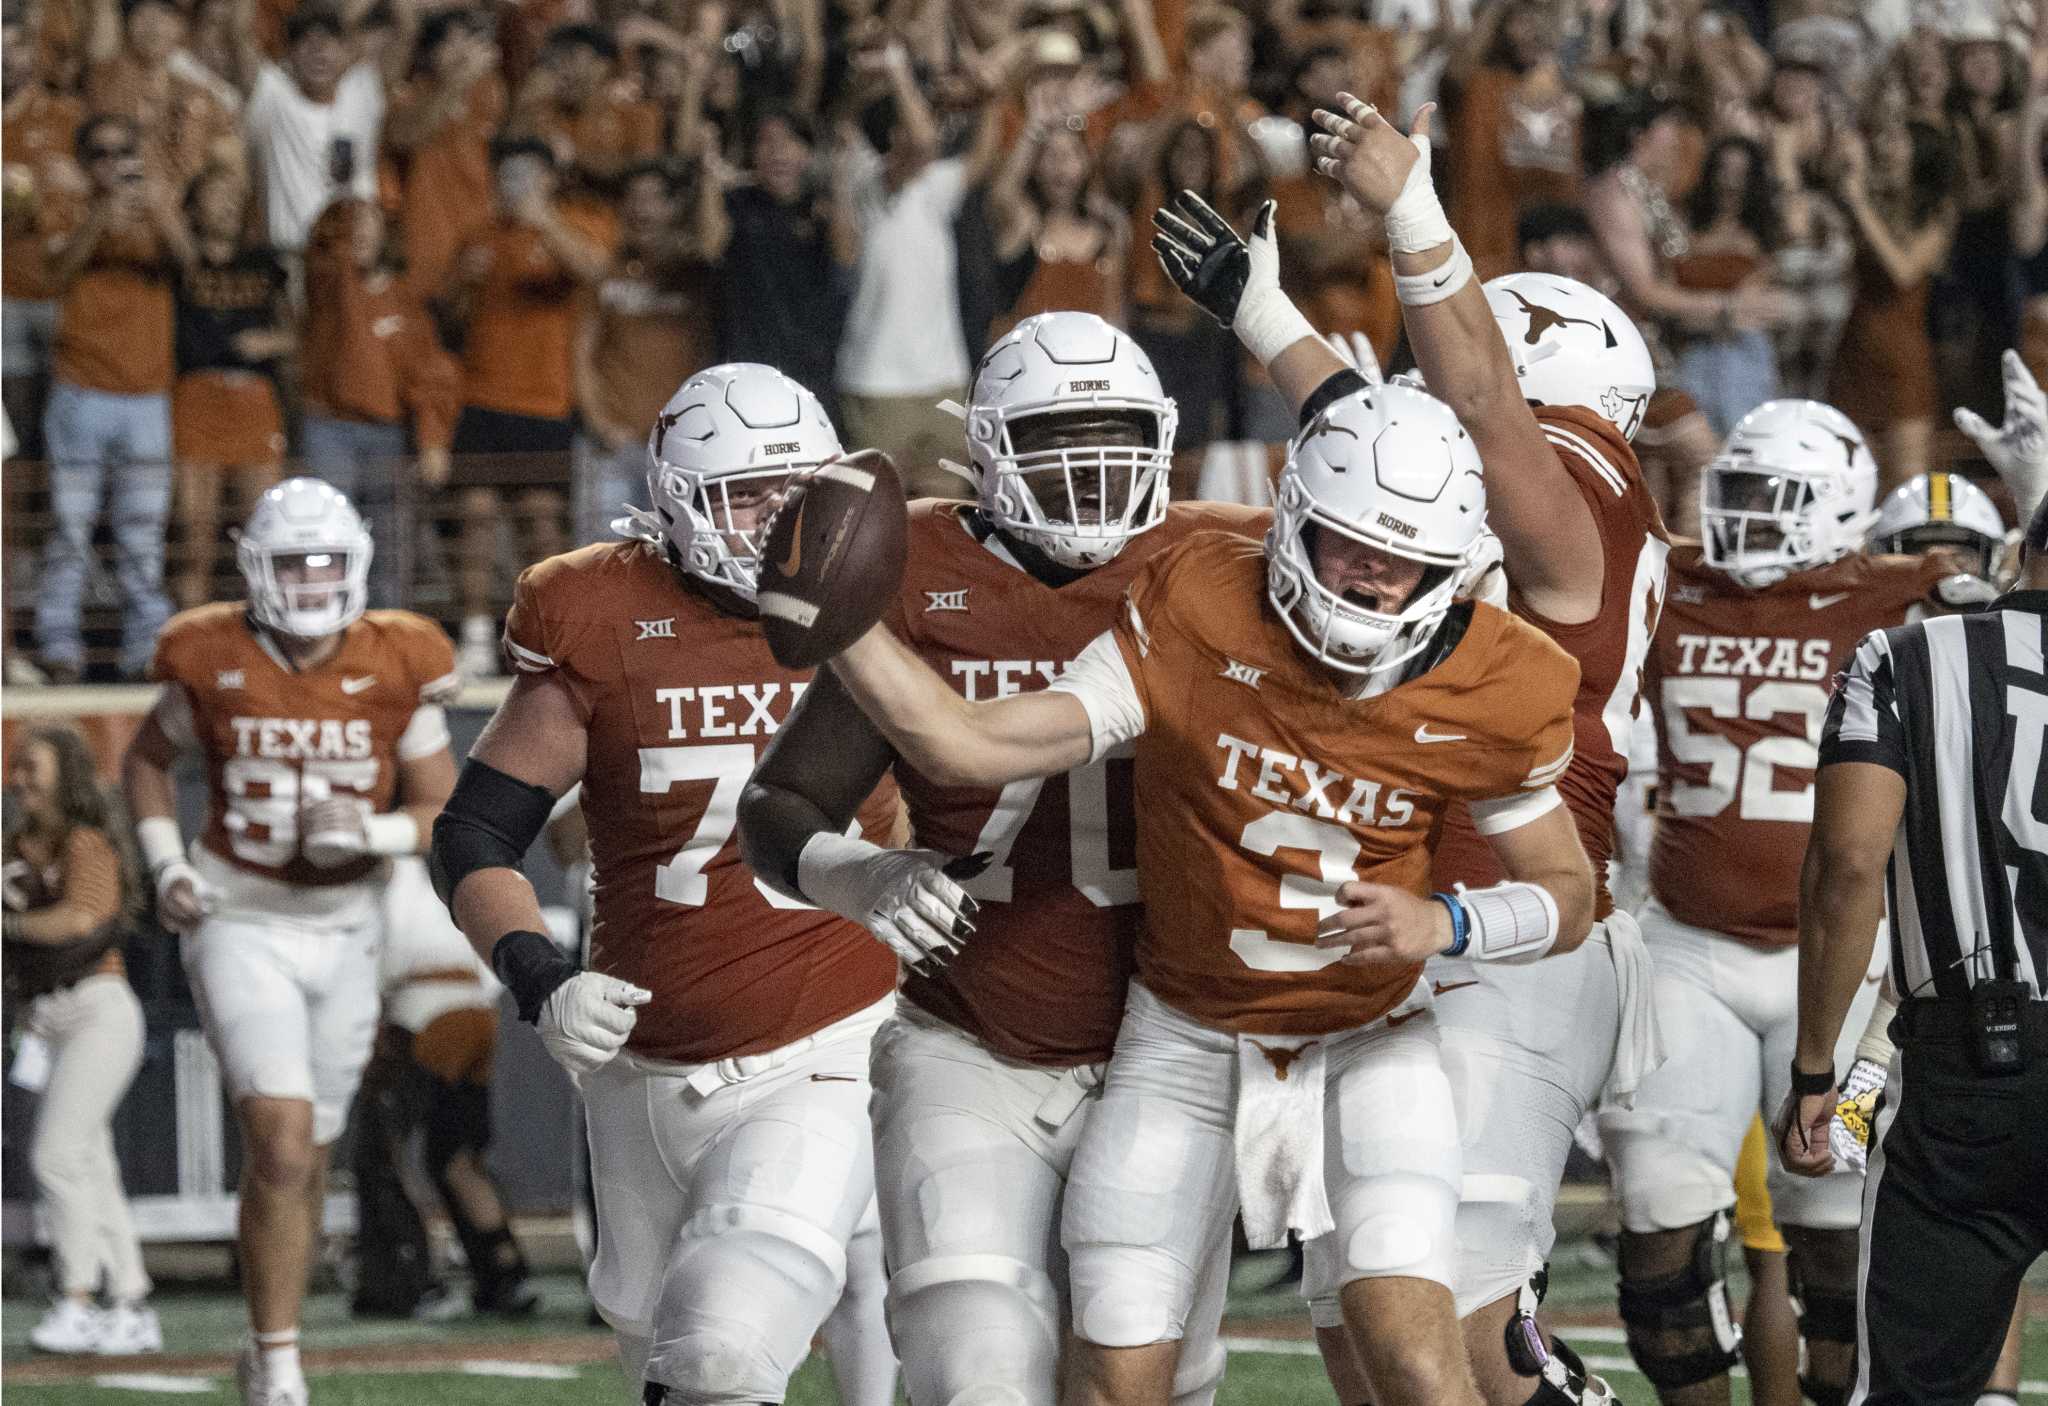 Longhorn fans get first glance, insight into competition within No